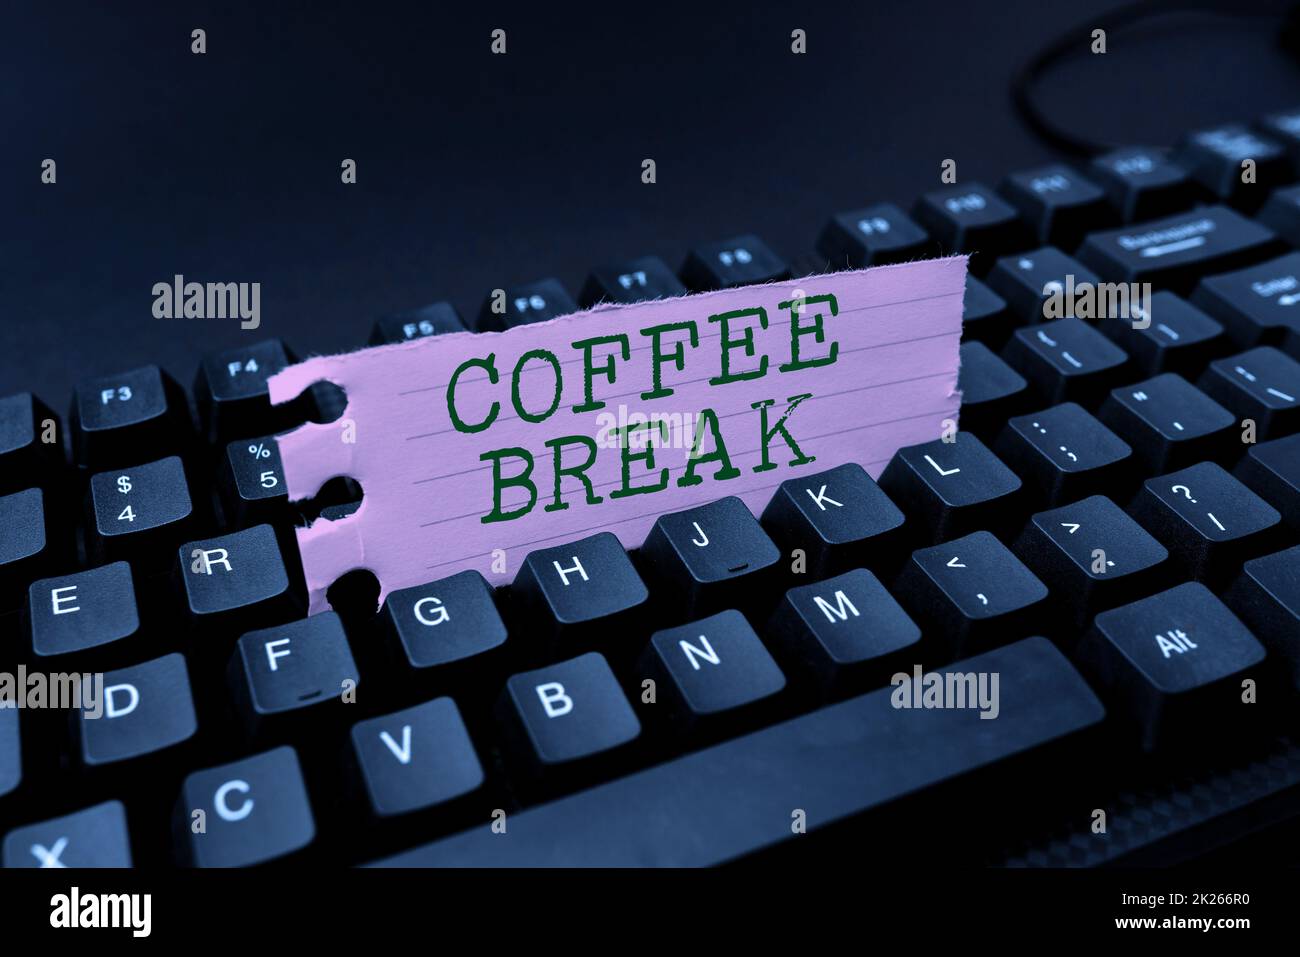 Writing displaying text Coffee Break. Concept meaning short time allotted for drinking coffee without doing any work Editing And Retyping Report Spelling Errors, Typing Online Shop Inventory Stock Photo